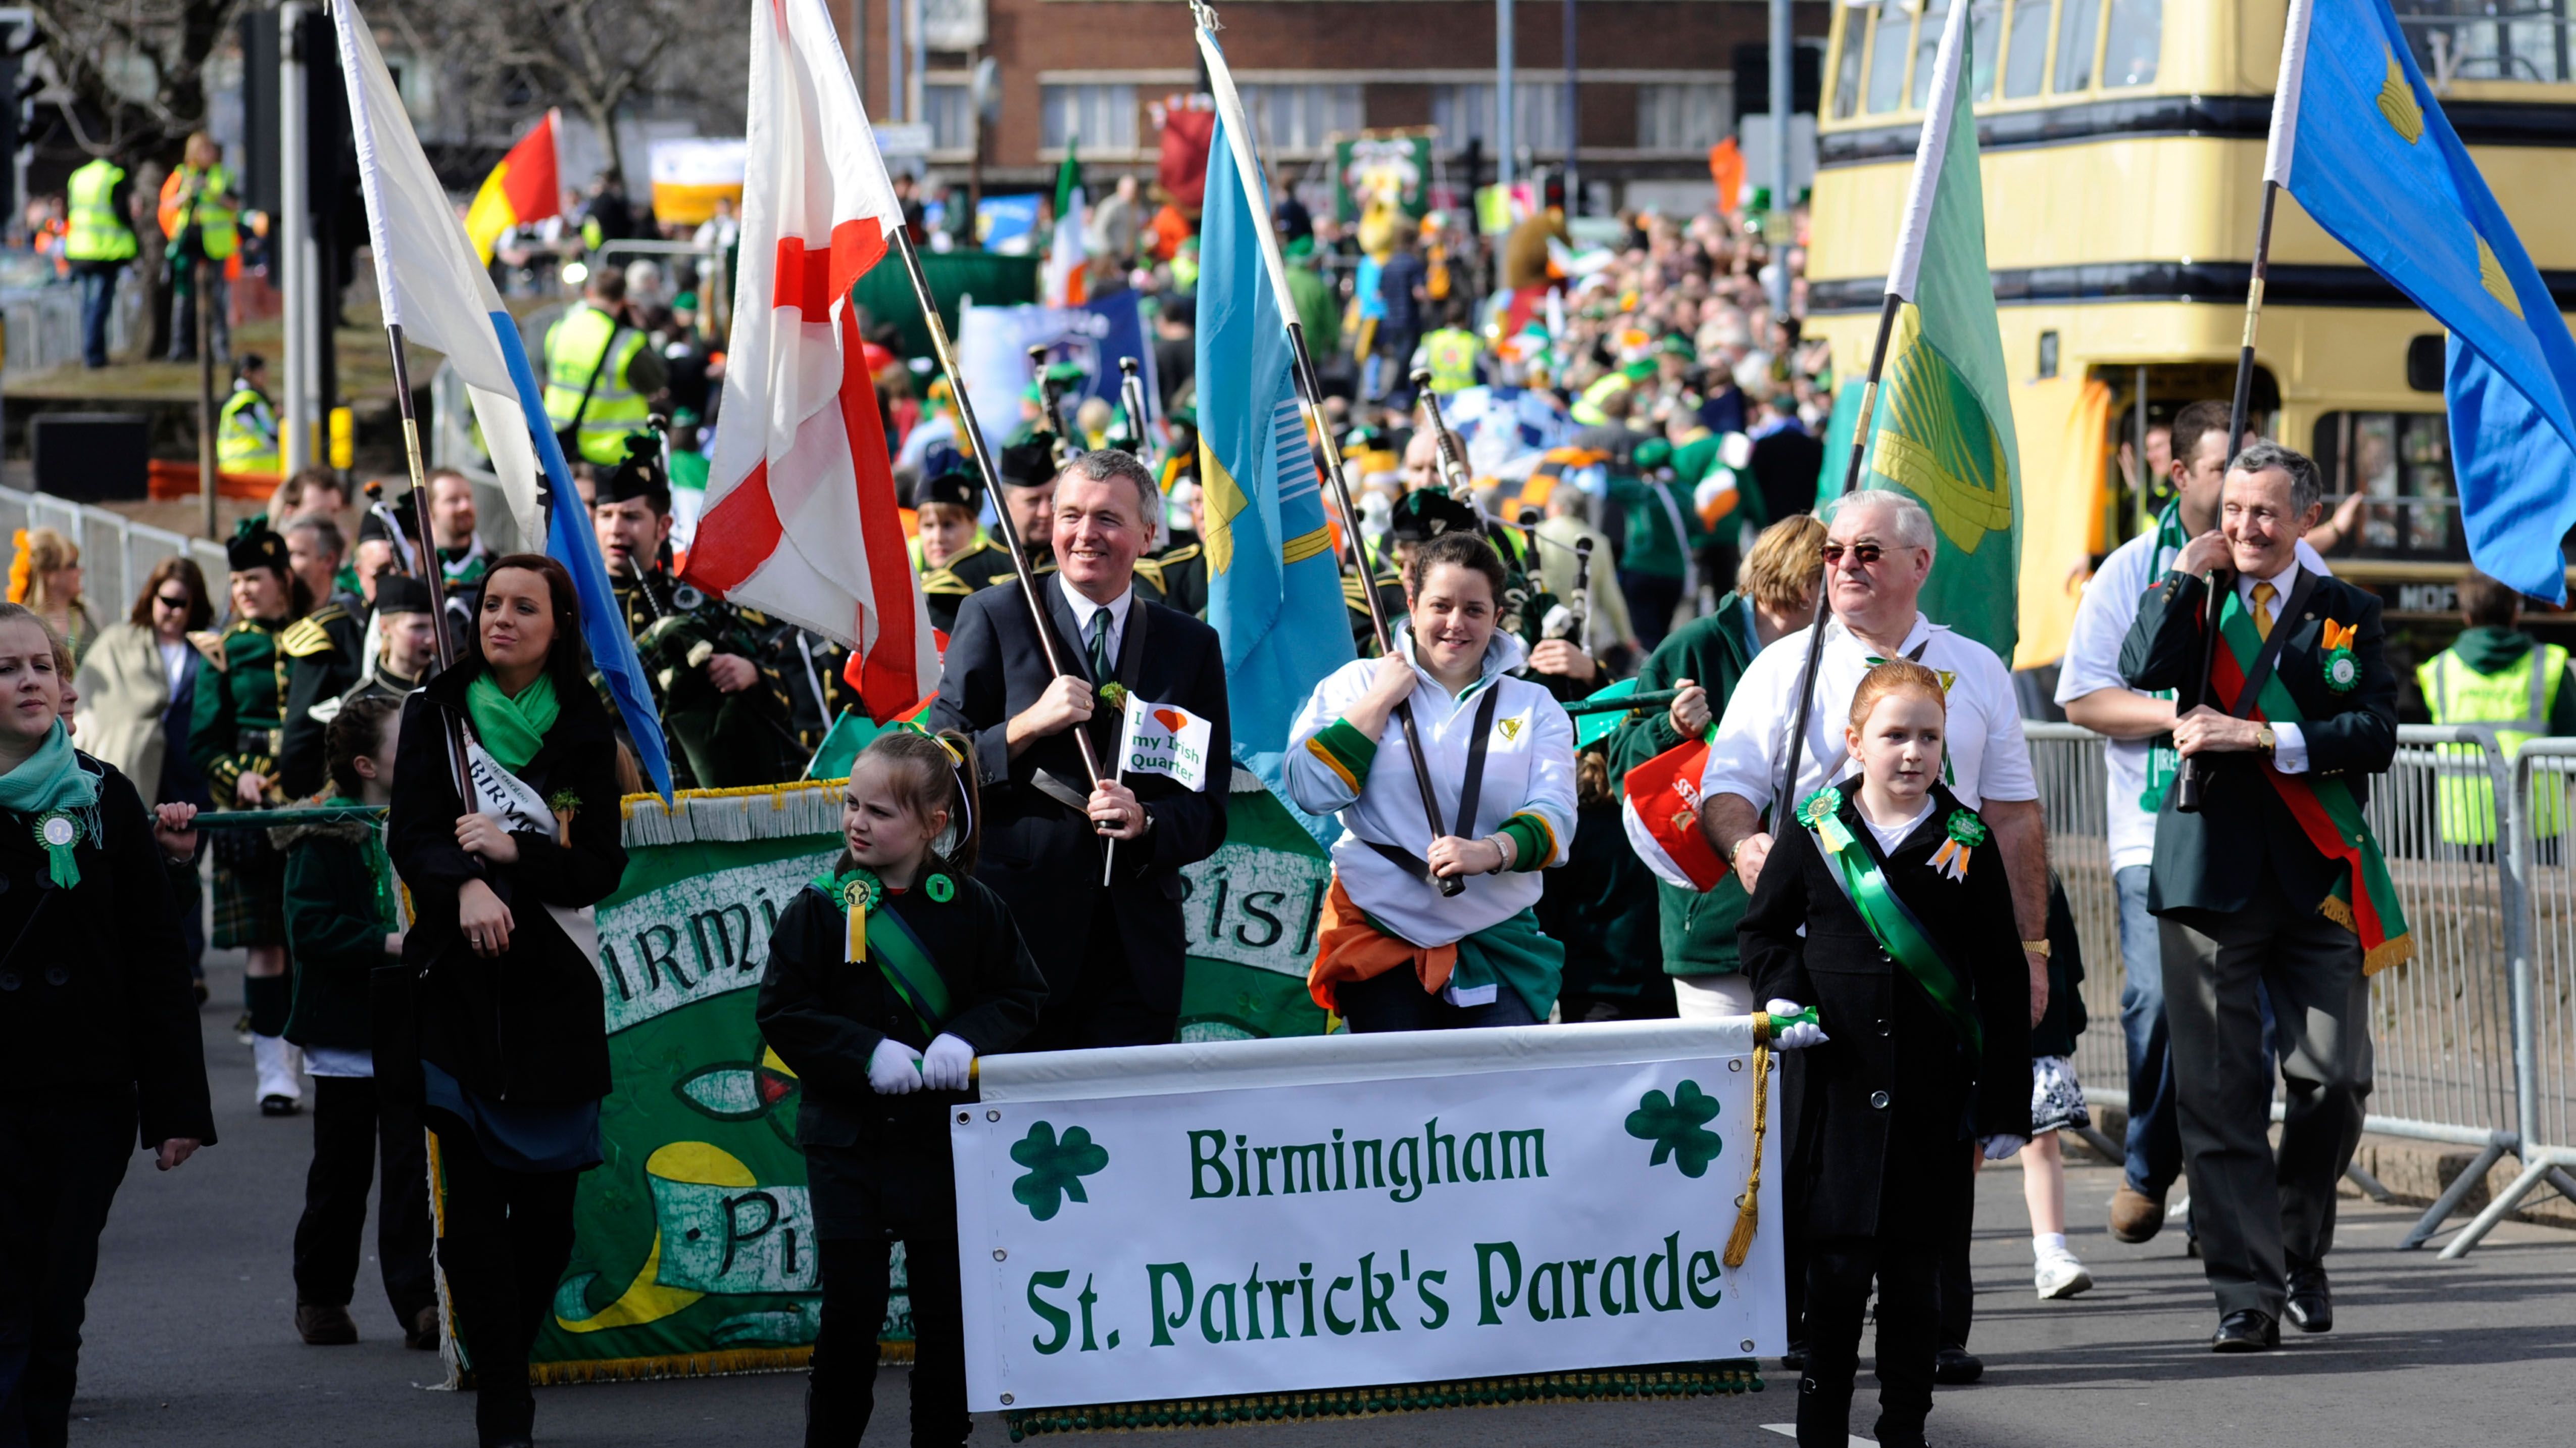 St Patrick's Day parade to return to Birmingham after fouryear break